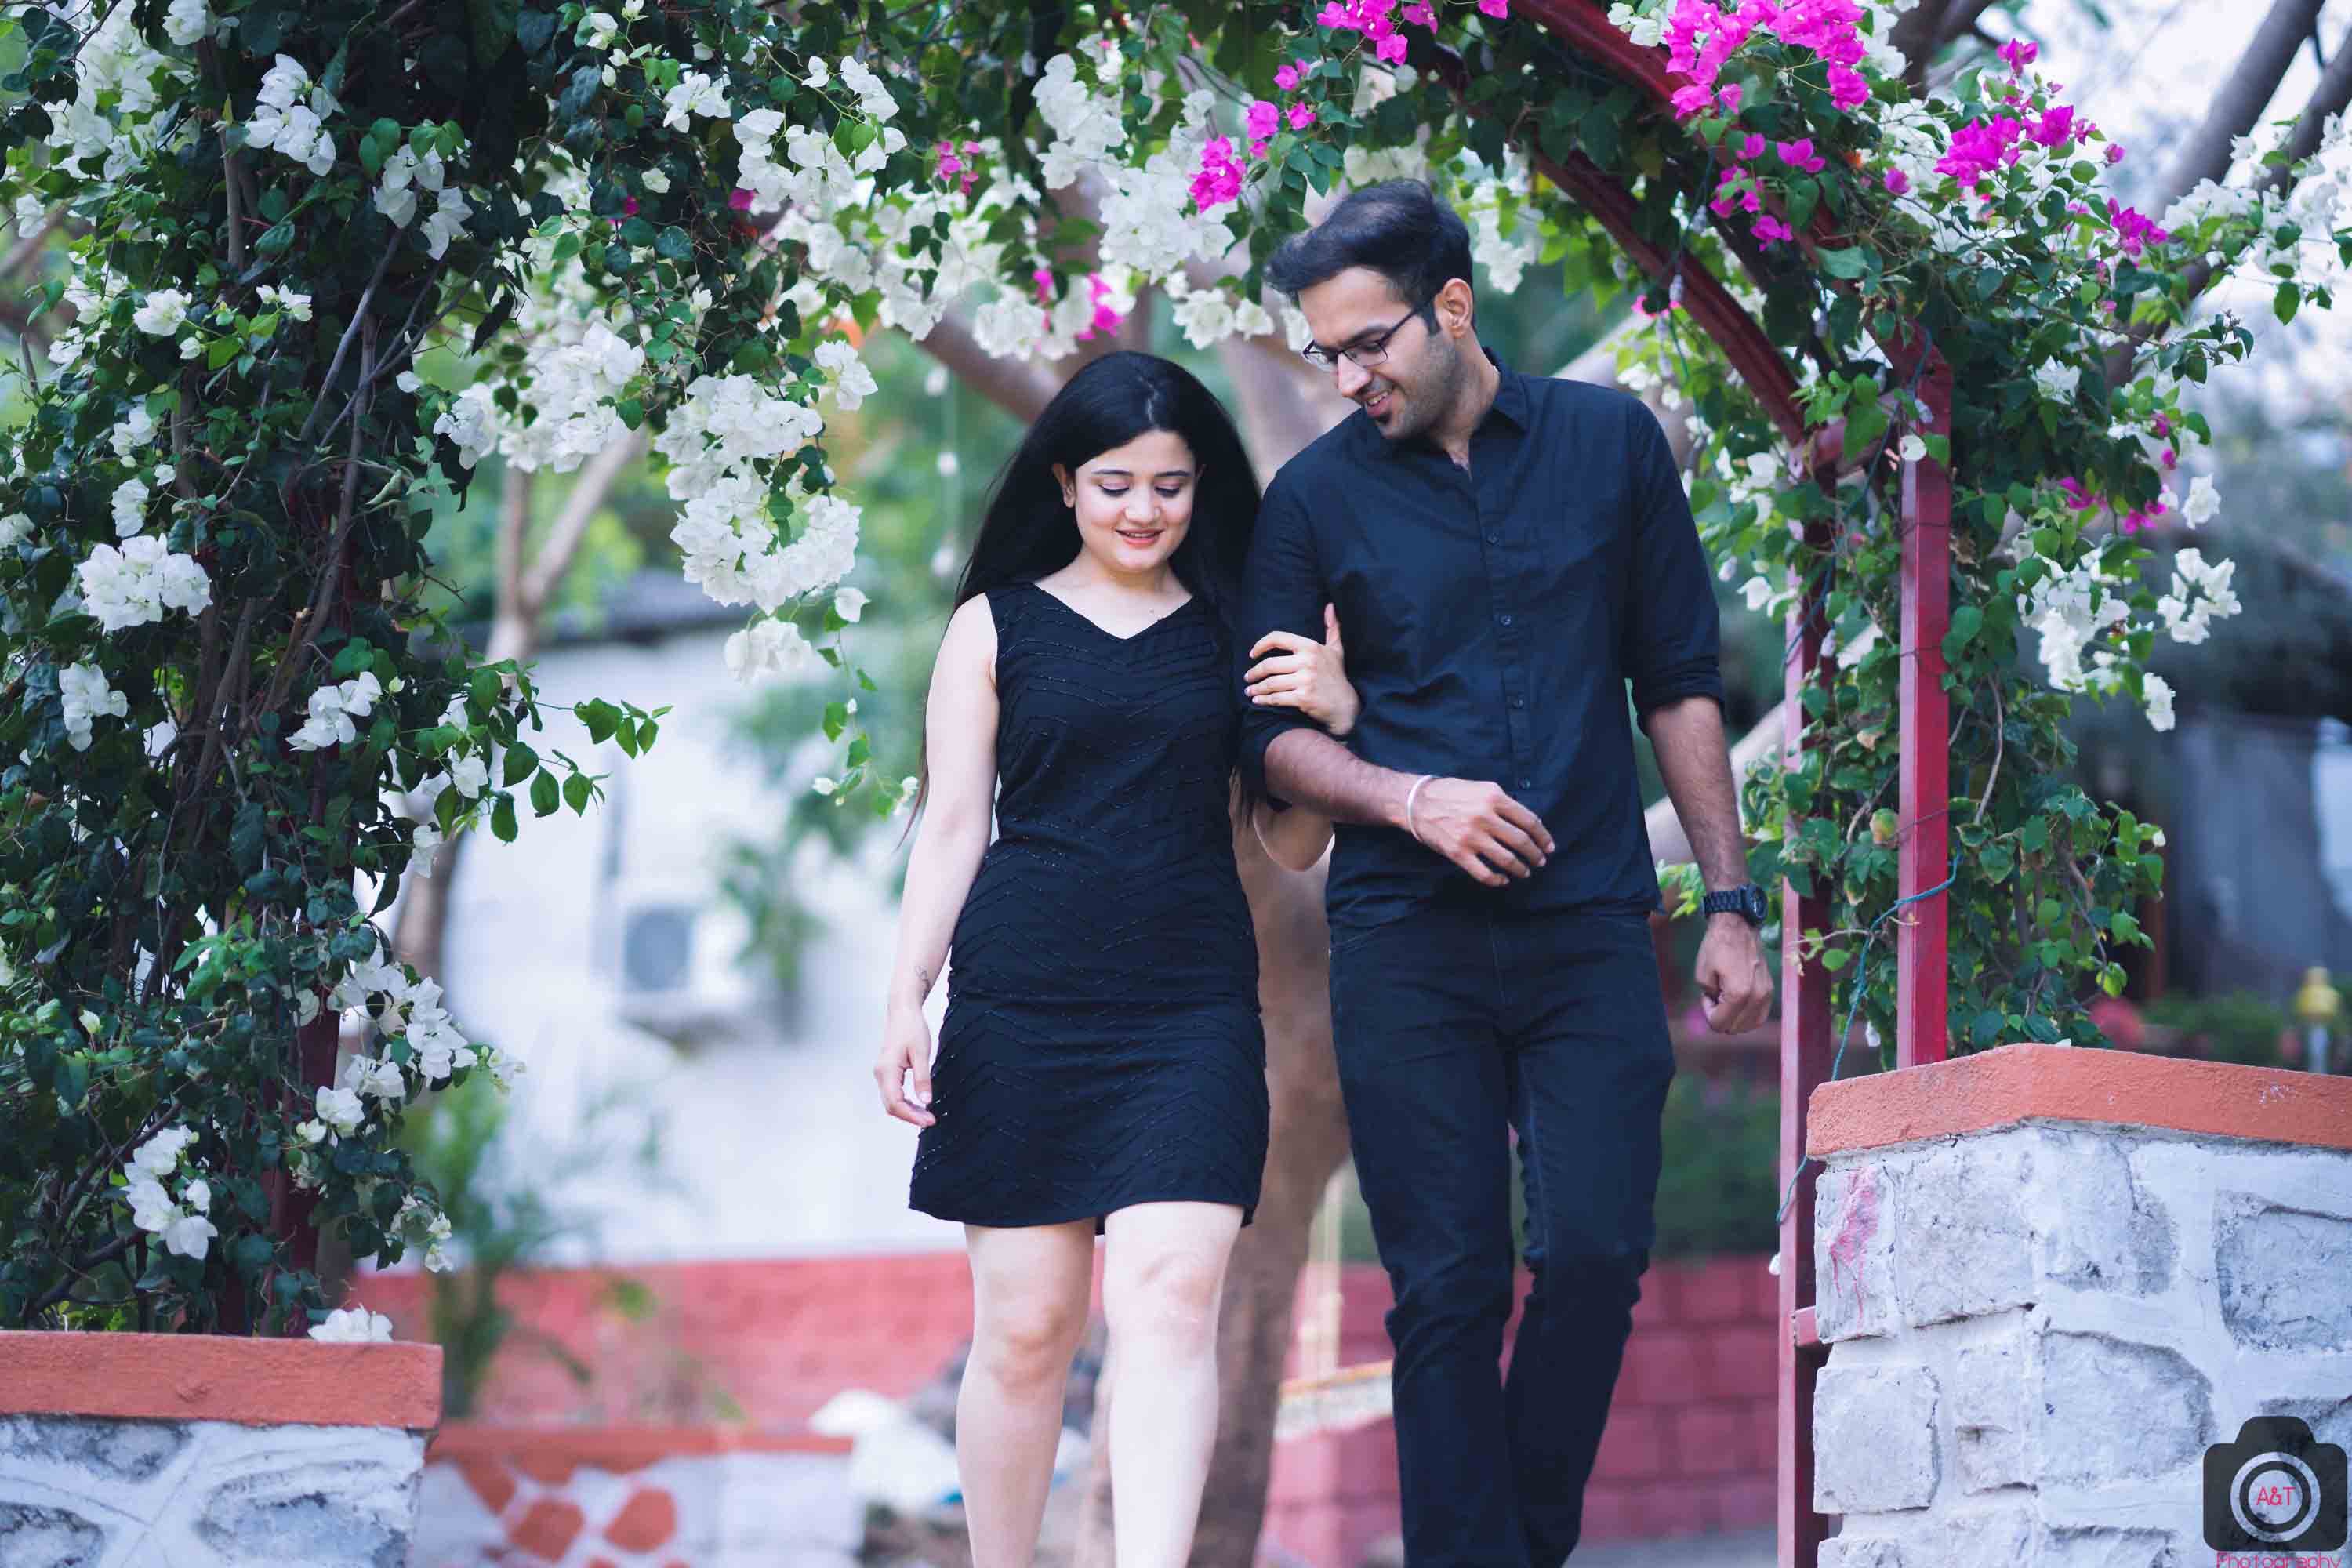 Candid & Romantic Pre-wedding Poses|Shilpa & Pulkit| A&T Photography| Best Pre-wedding Photographer in Pune, India